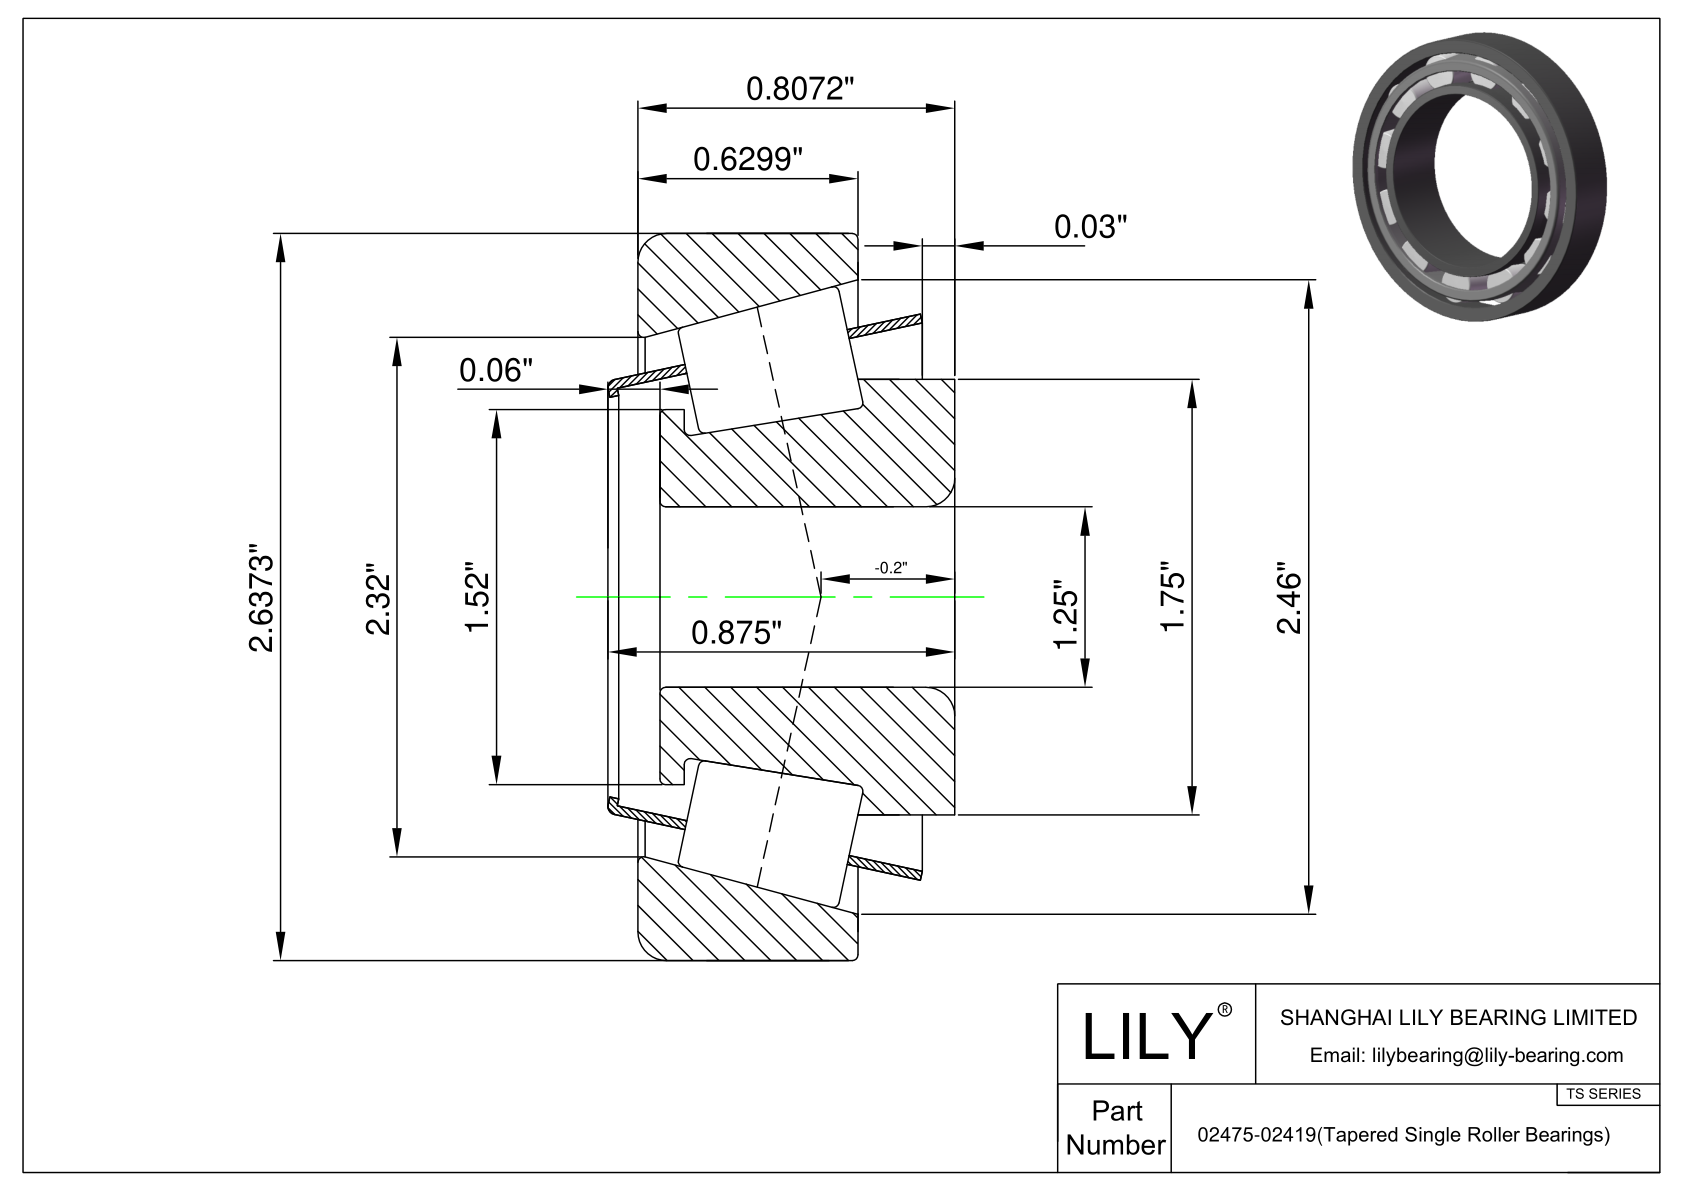 02475-02419 TS (Tapered Single Roller Bearings) (Imperial) cad drawing